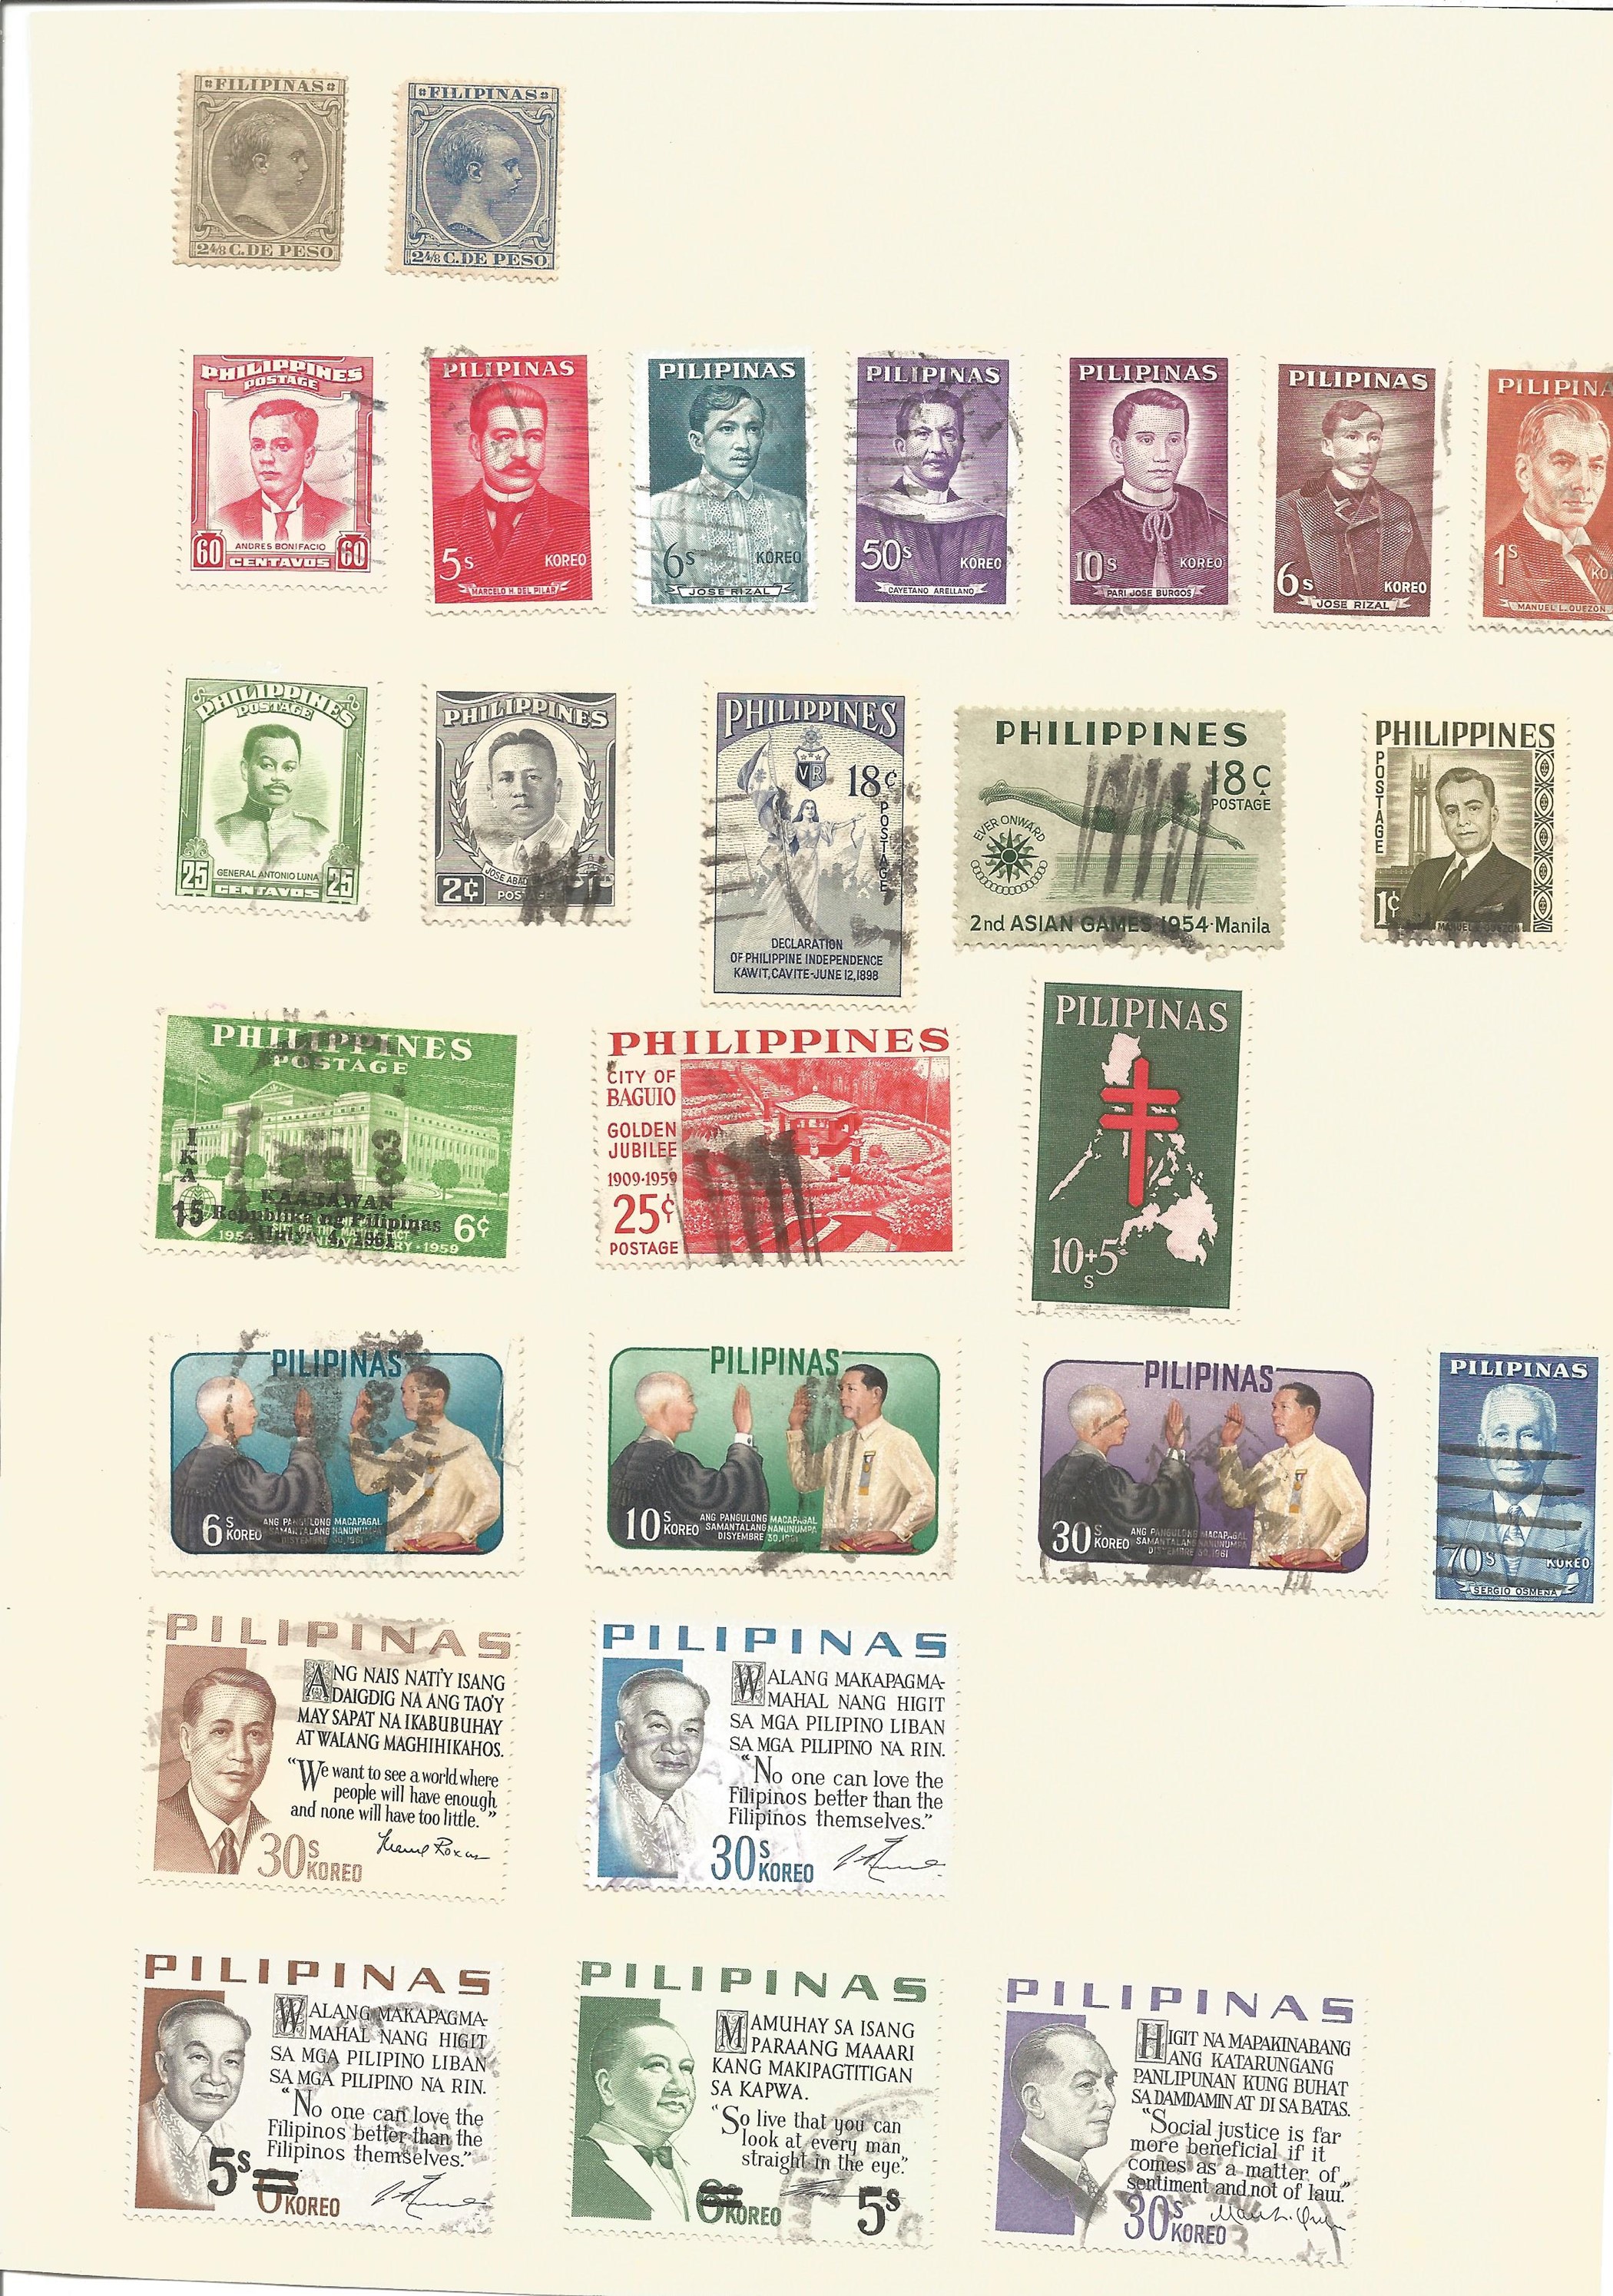 World stamp collection over 10 loose album pages. Includes stamps from Suez canal, Ethiopia, Persia,